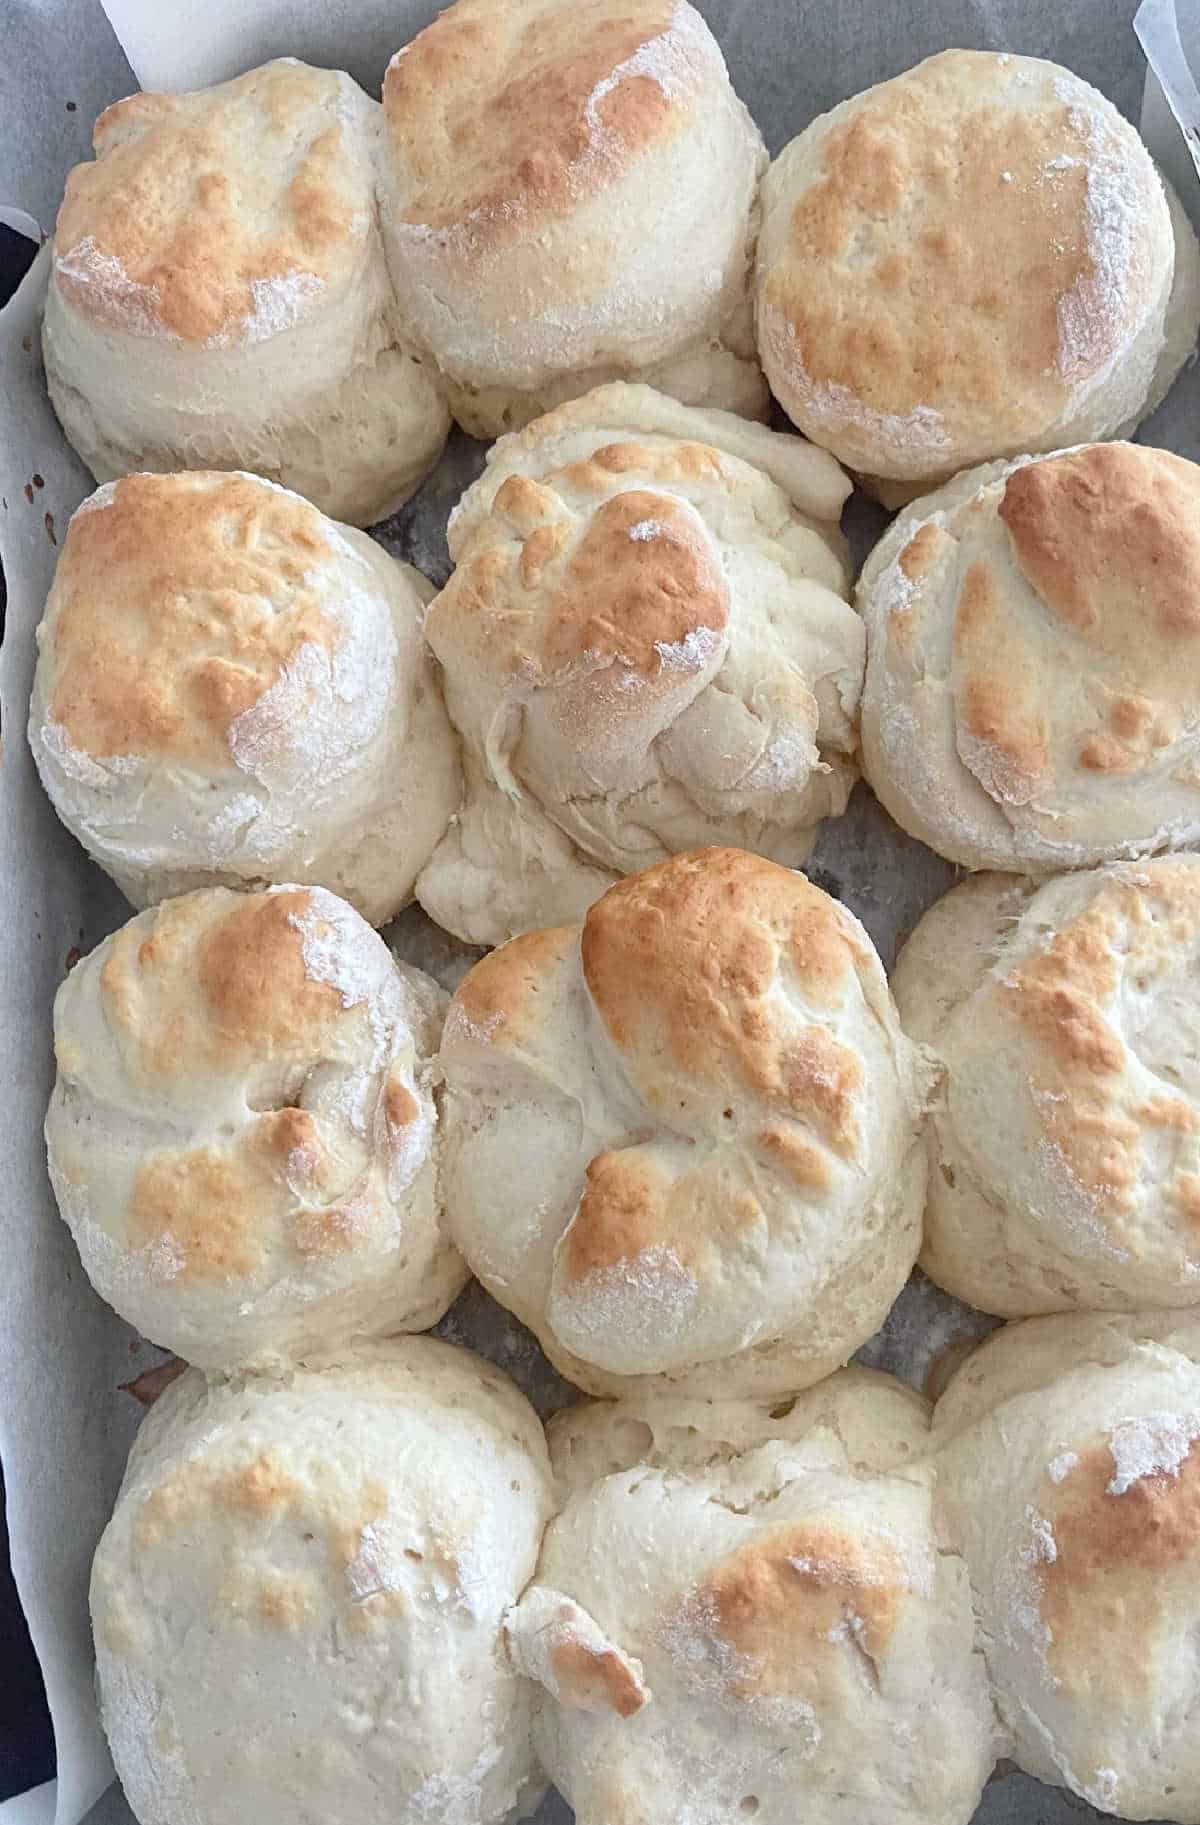 Cooked scones on a baking tray.